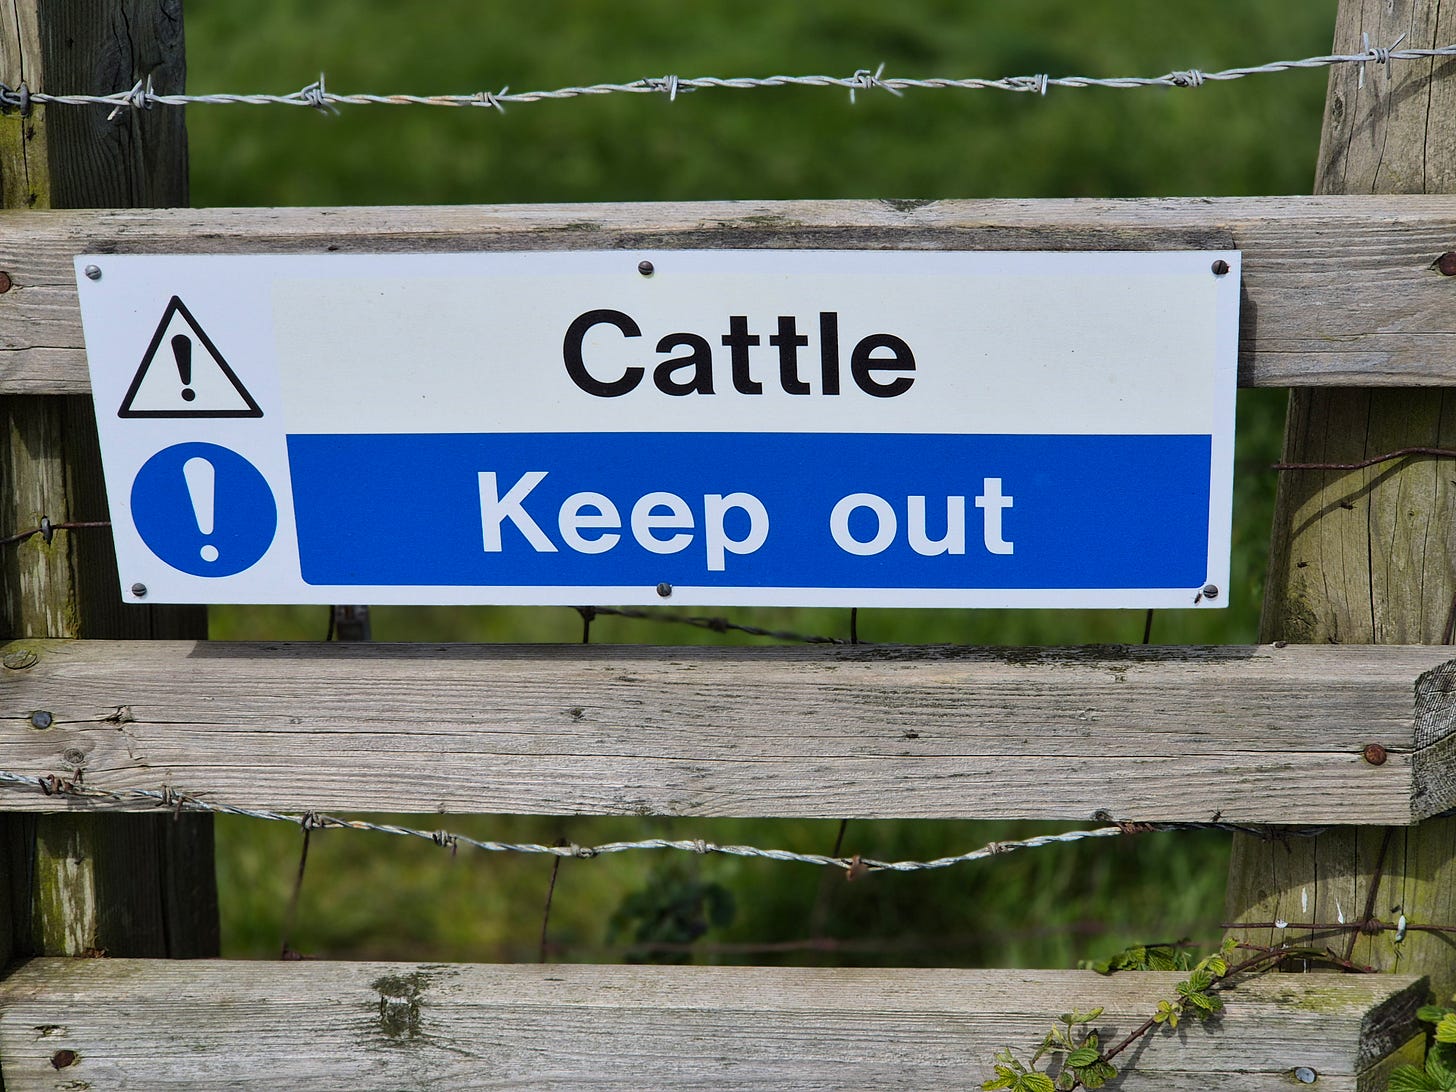 Cattle keep out. Photo by Terry Freedman